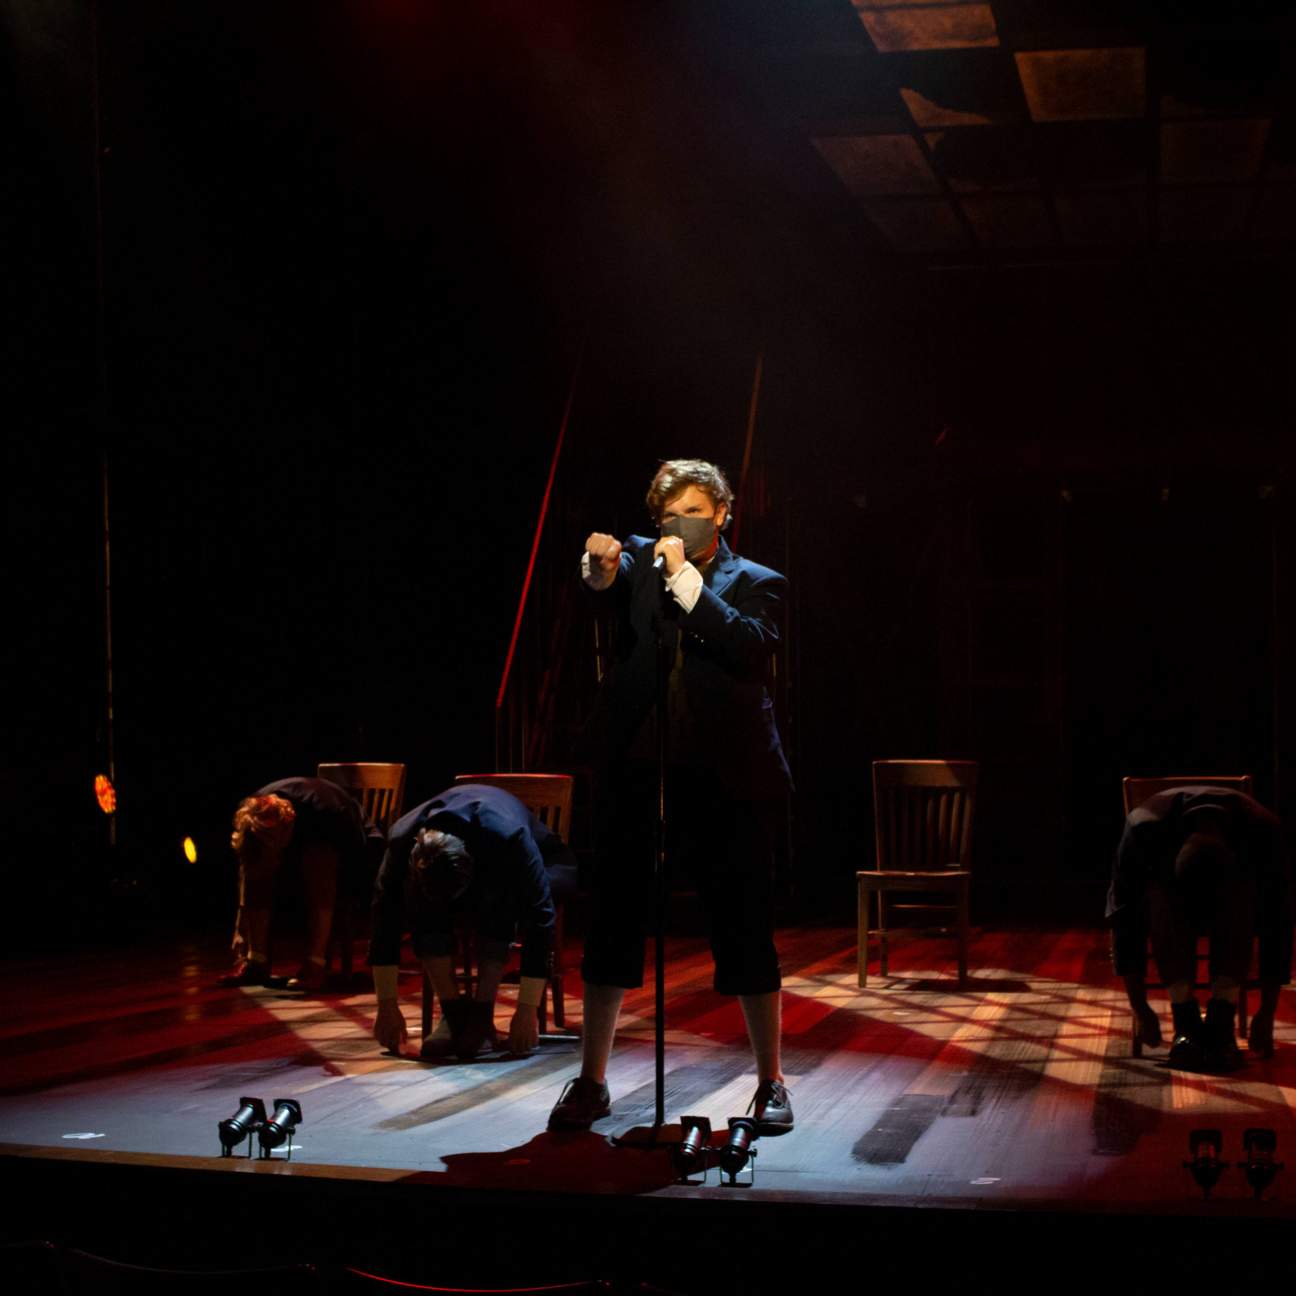 A young man in a sweater stands at his microphone stand, singing aggressively while pointing out at the audience. Behind him, his classmates sit in their chairs with their heads on their knees. Red light washes the stage.